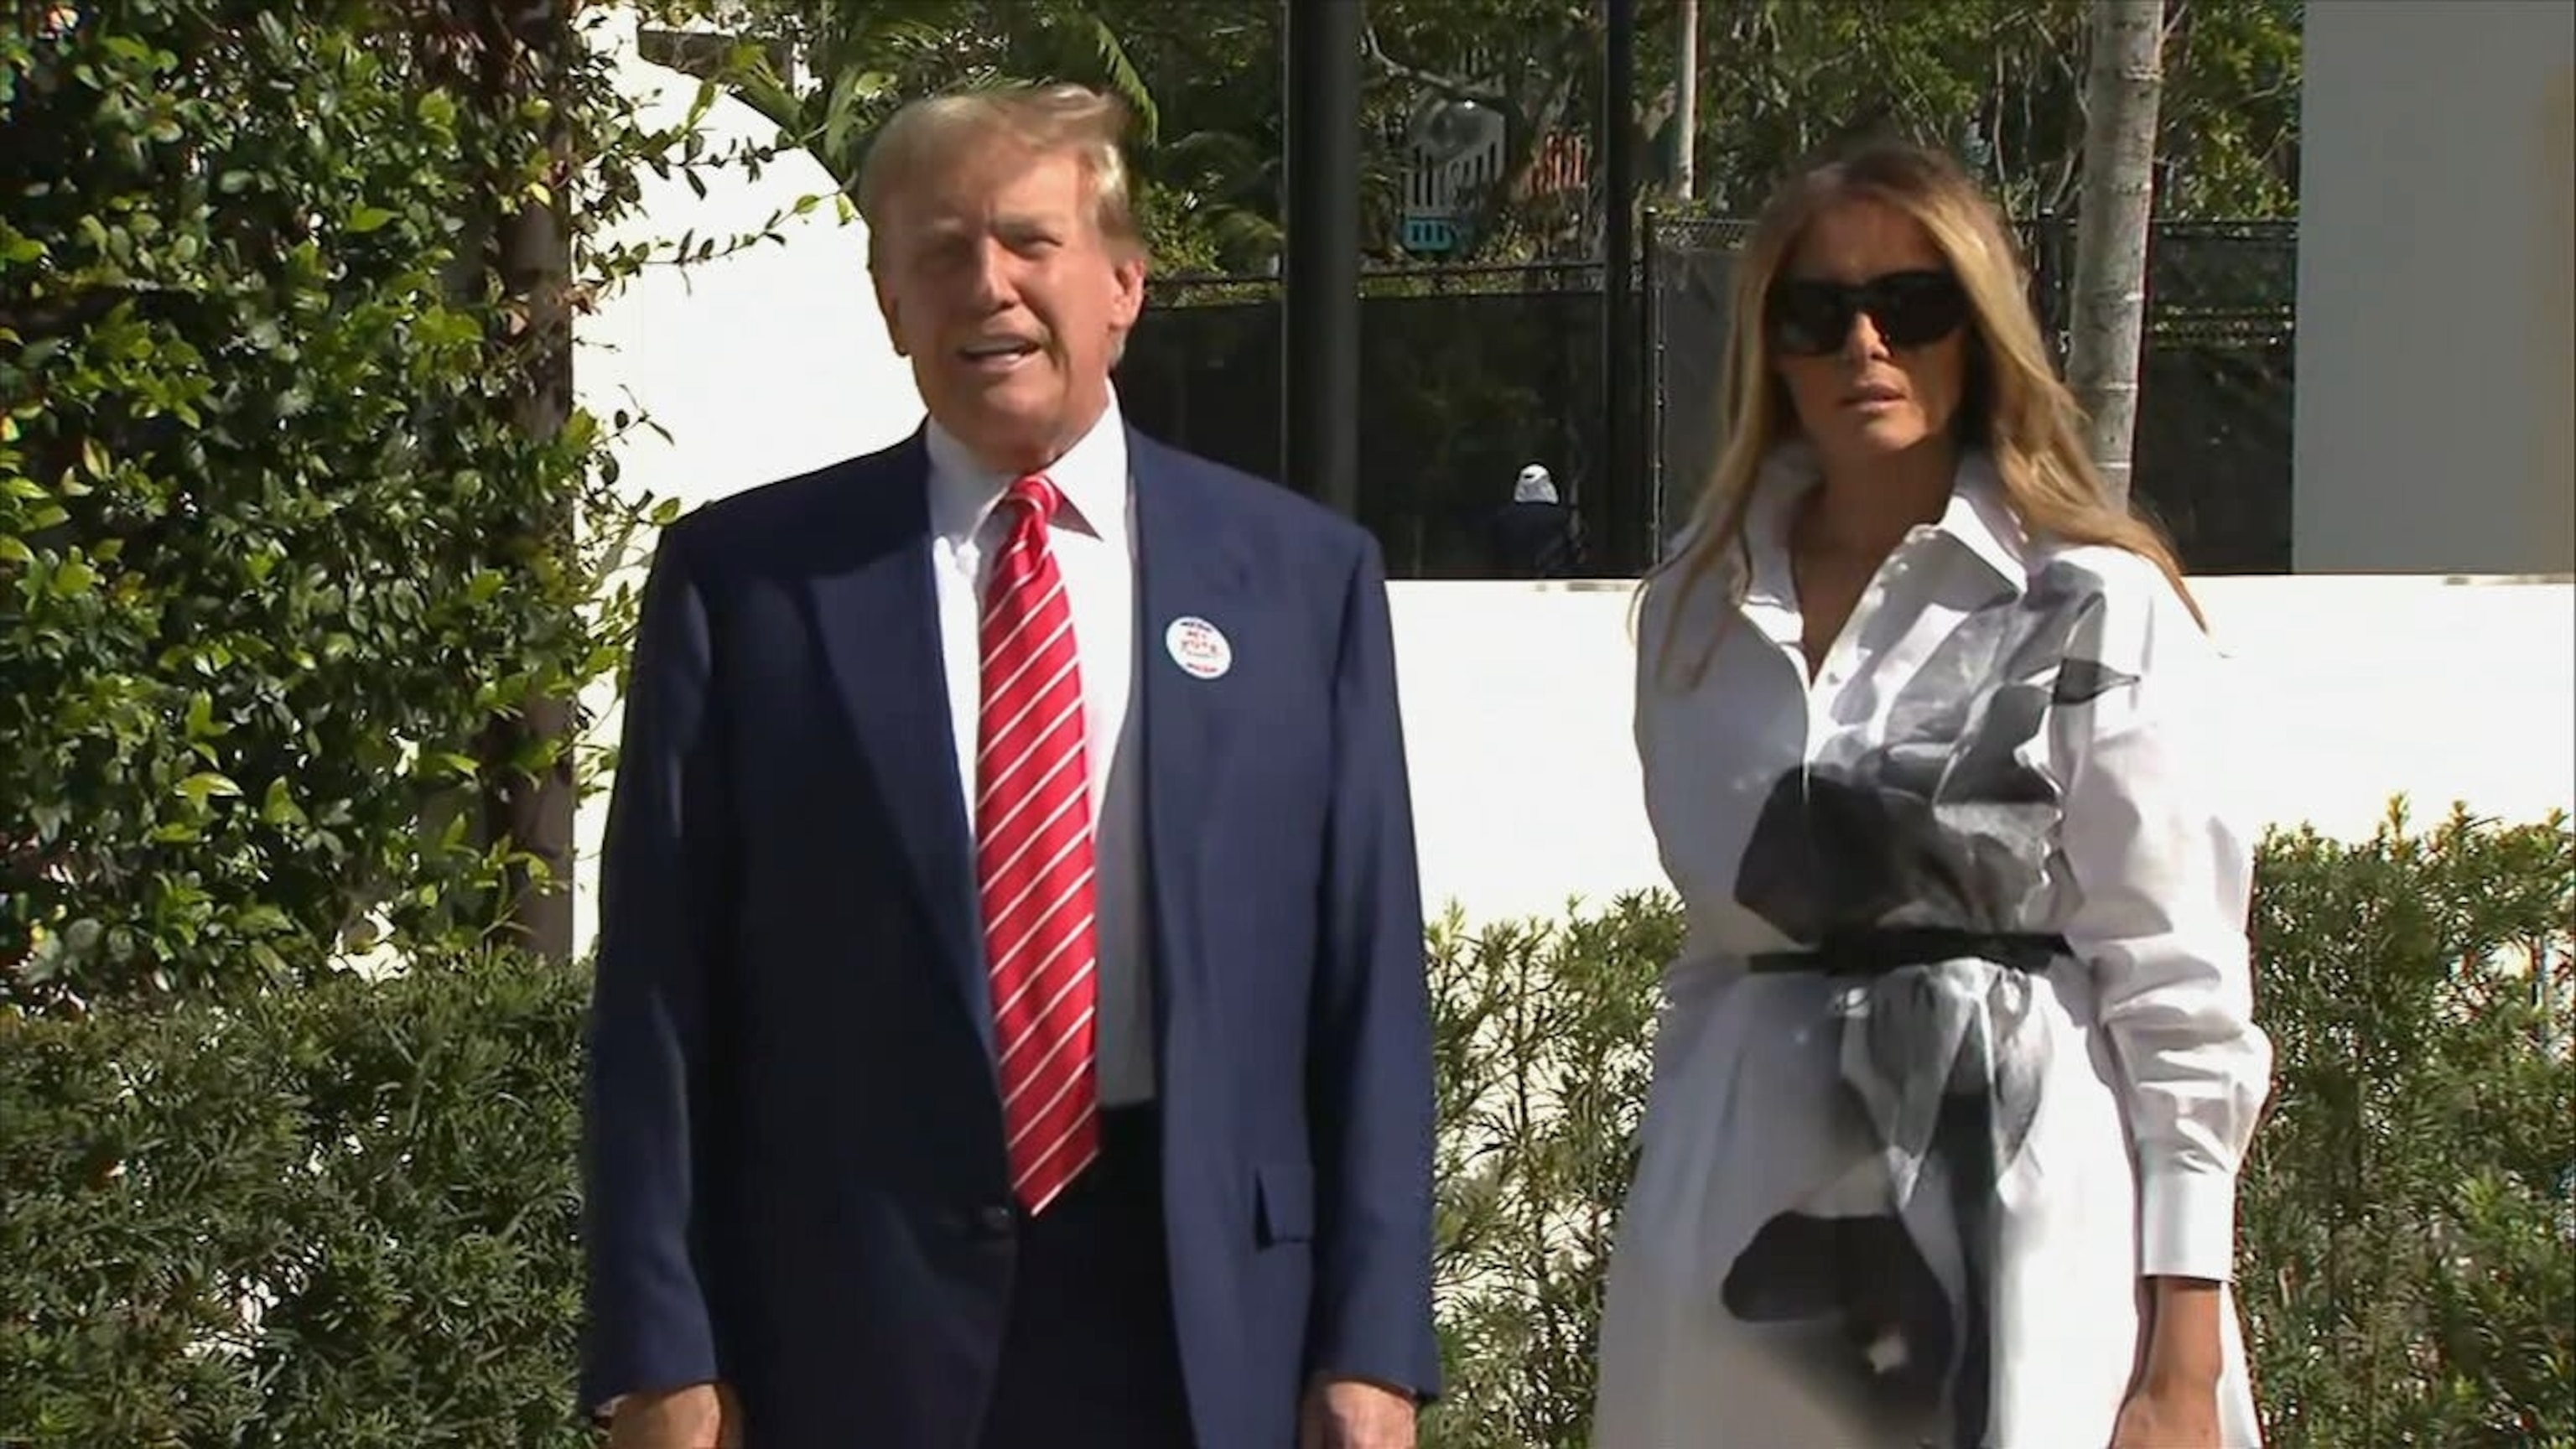 PHOTO: Former President Donald Trump speaks to the press while his wife Melania Trump looks on after voting in the primary election in West Palm Beach, Fla., on March 19, 2024.